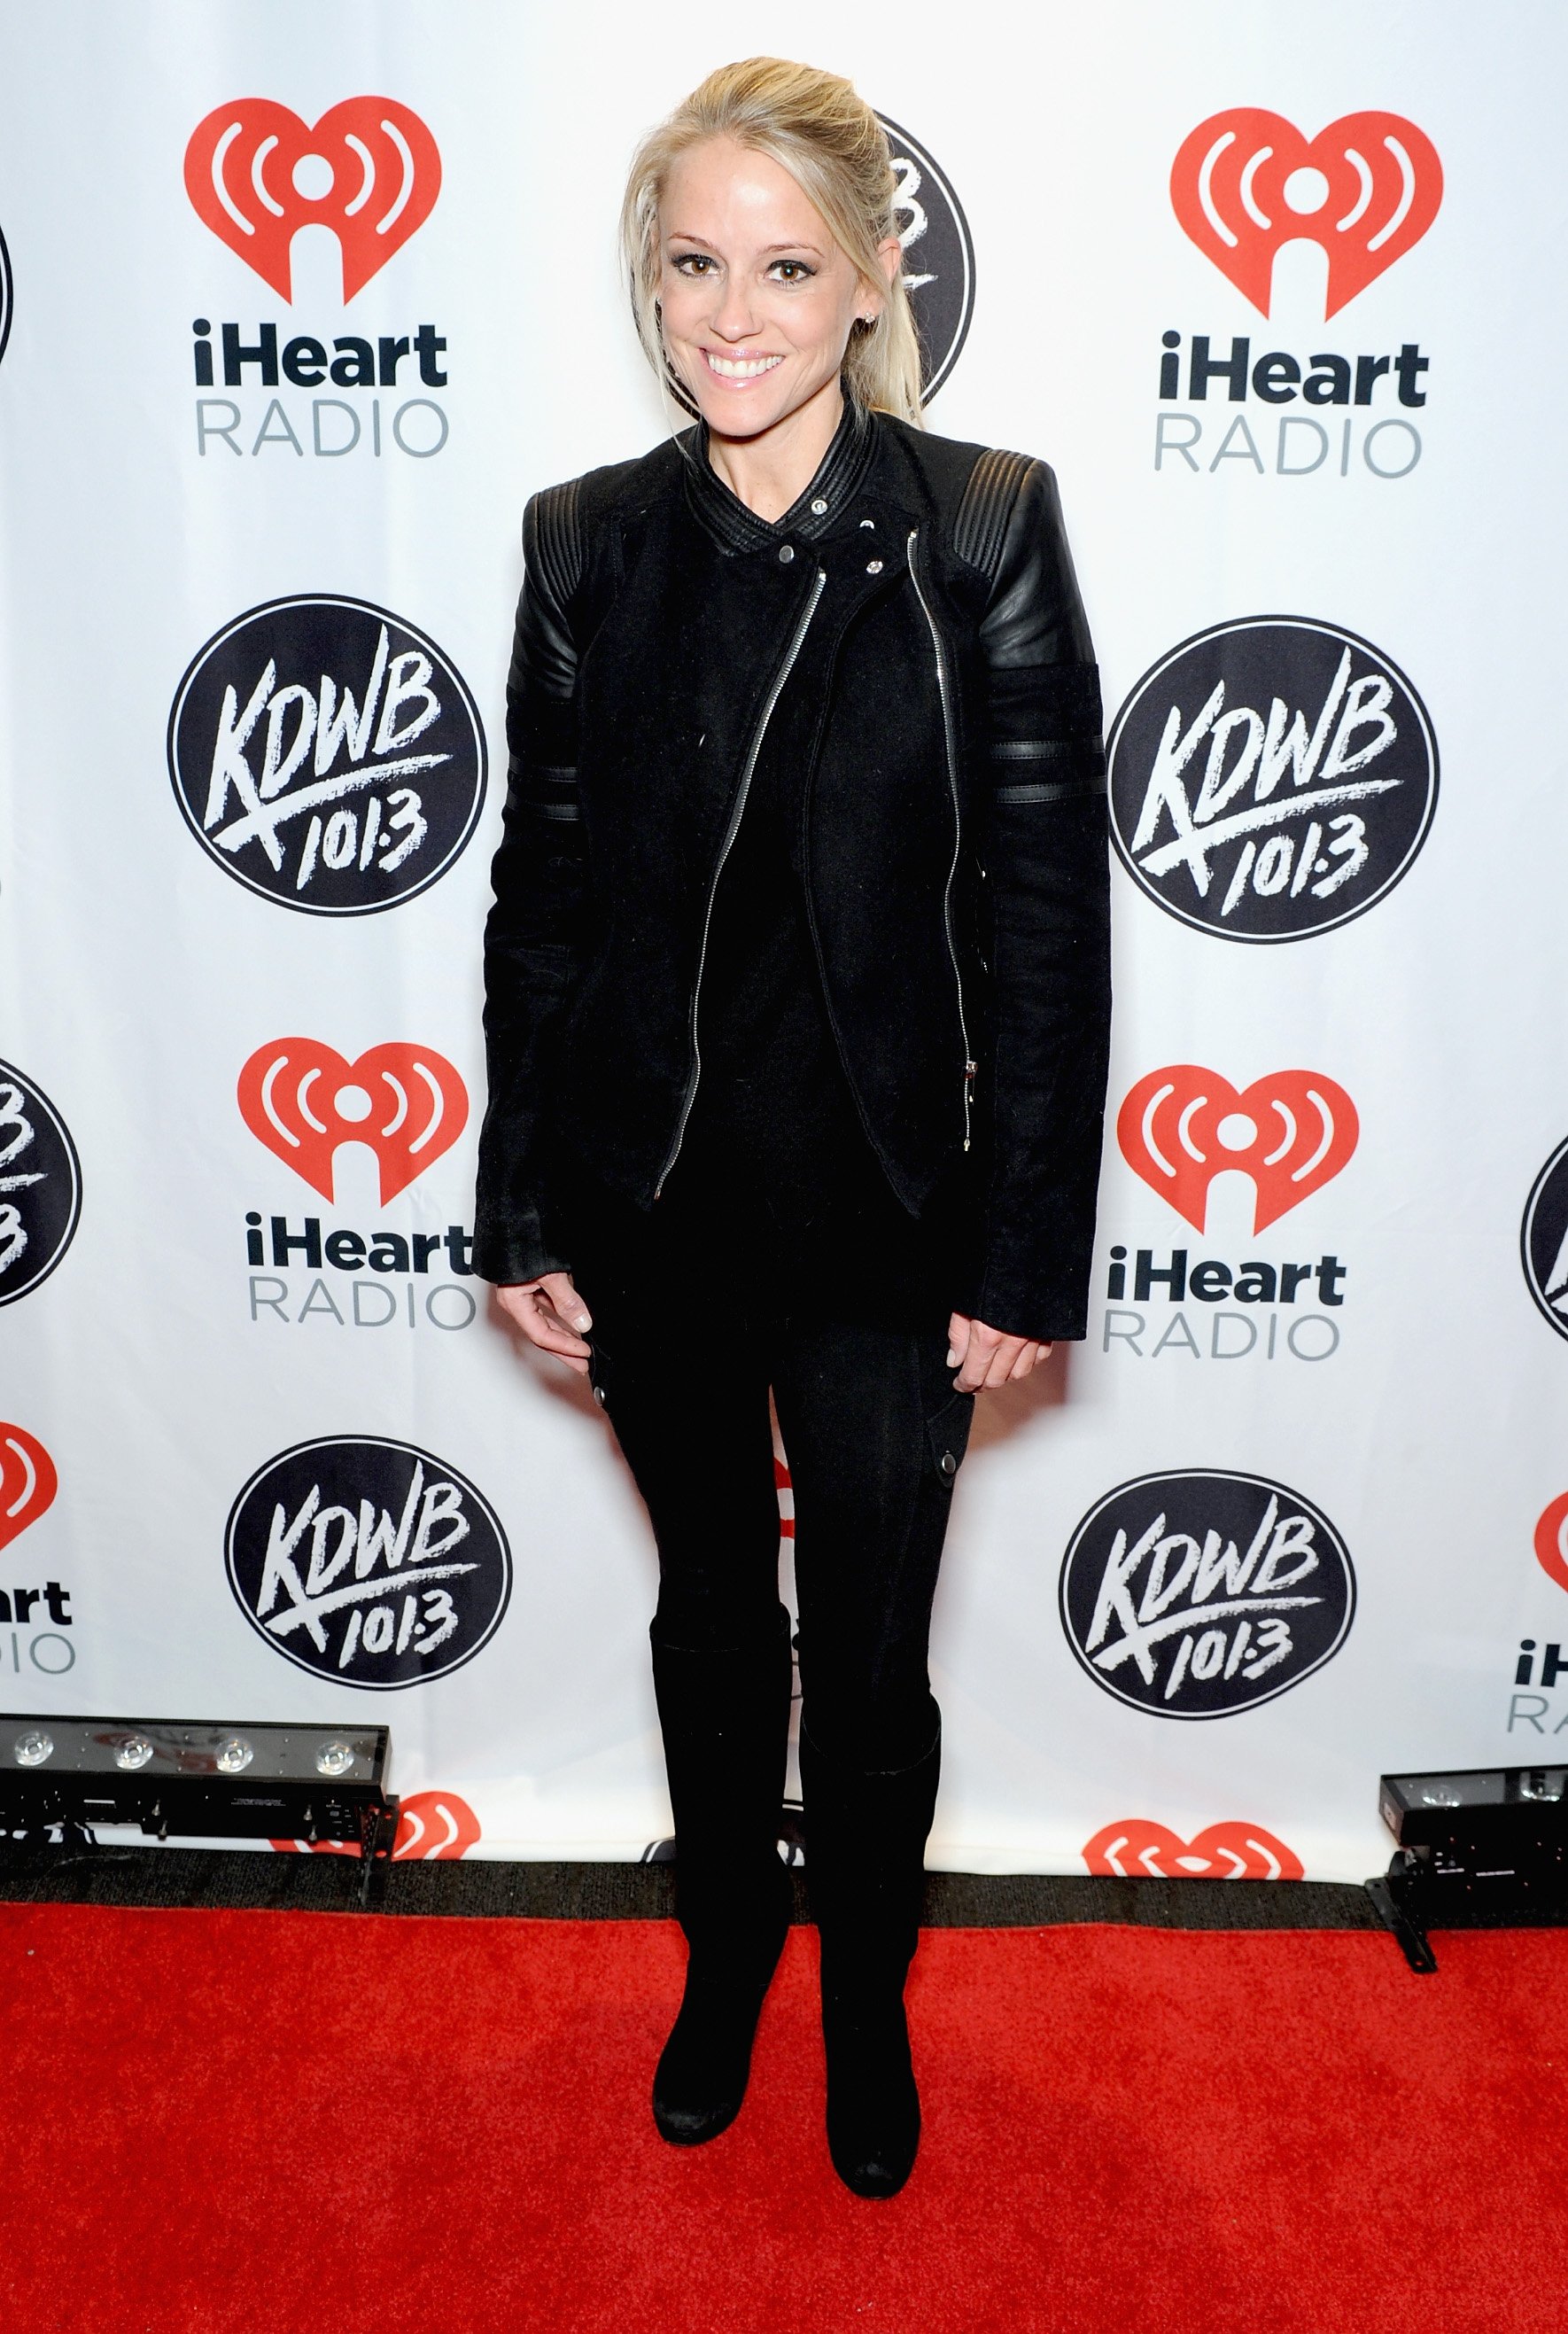 Nicole Curtis attends Jingle Ball 2014 in St Paul, Minnesota on December 8, 2014 | Photo: Getty Images